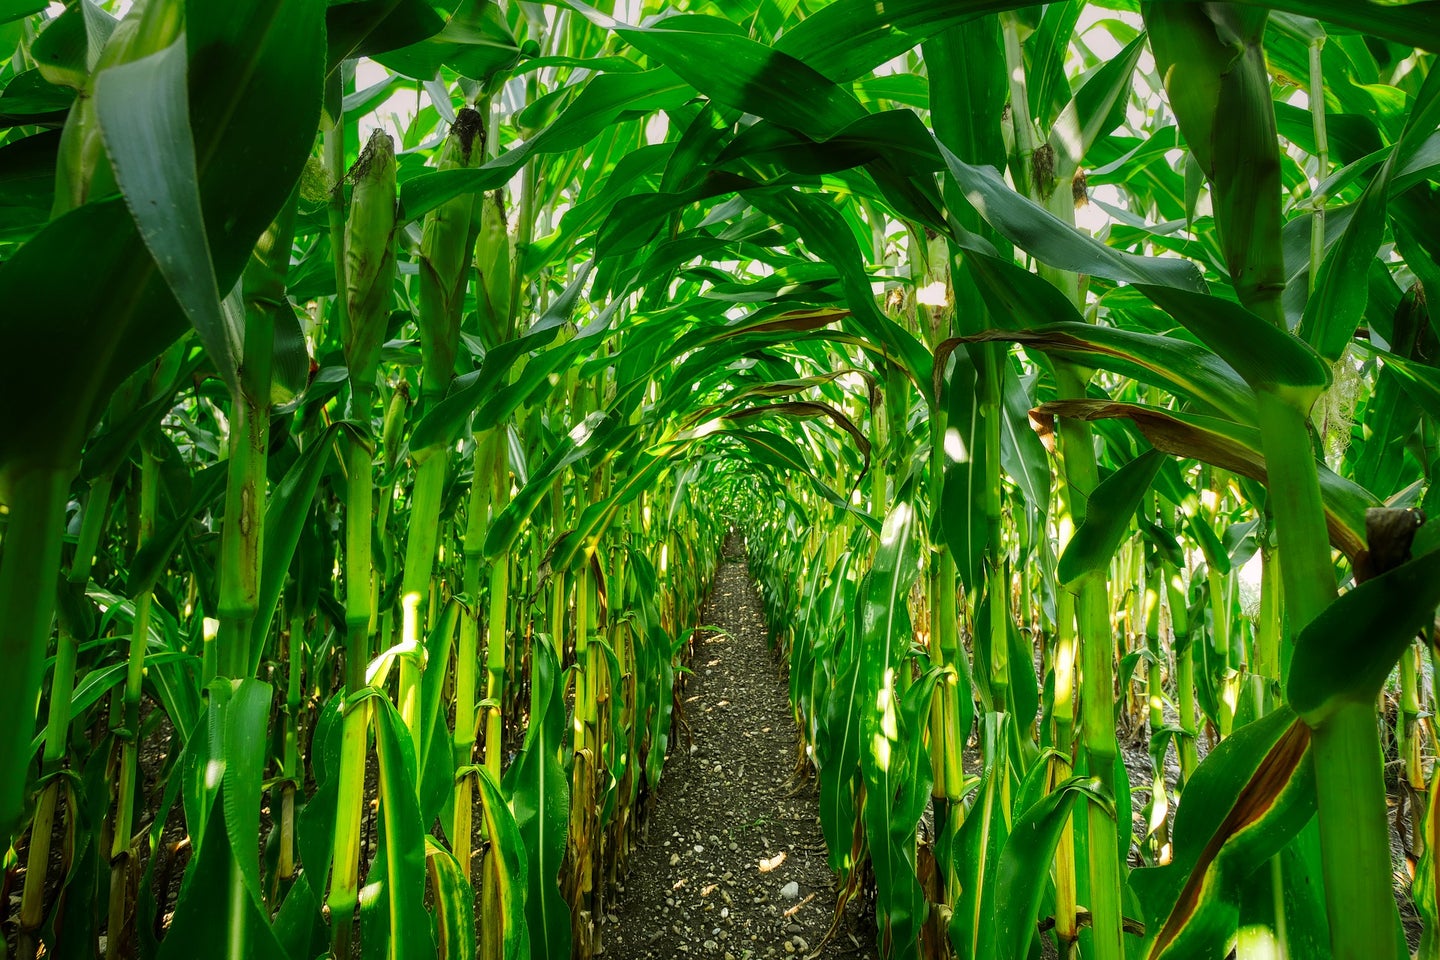 Growing more crops to make biofuels, like corn and soy, can leave some serious environmental dilemmas.